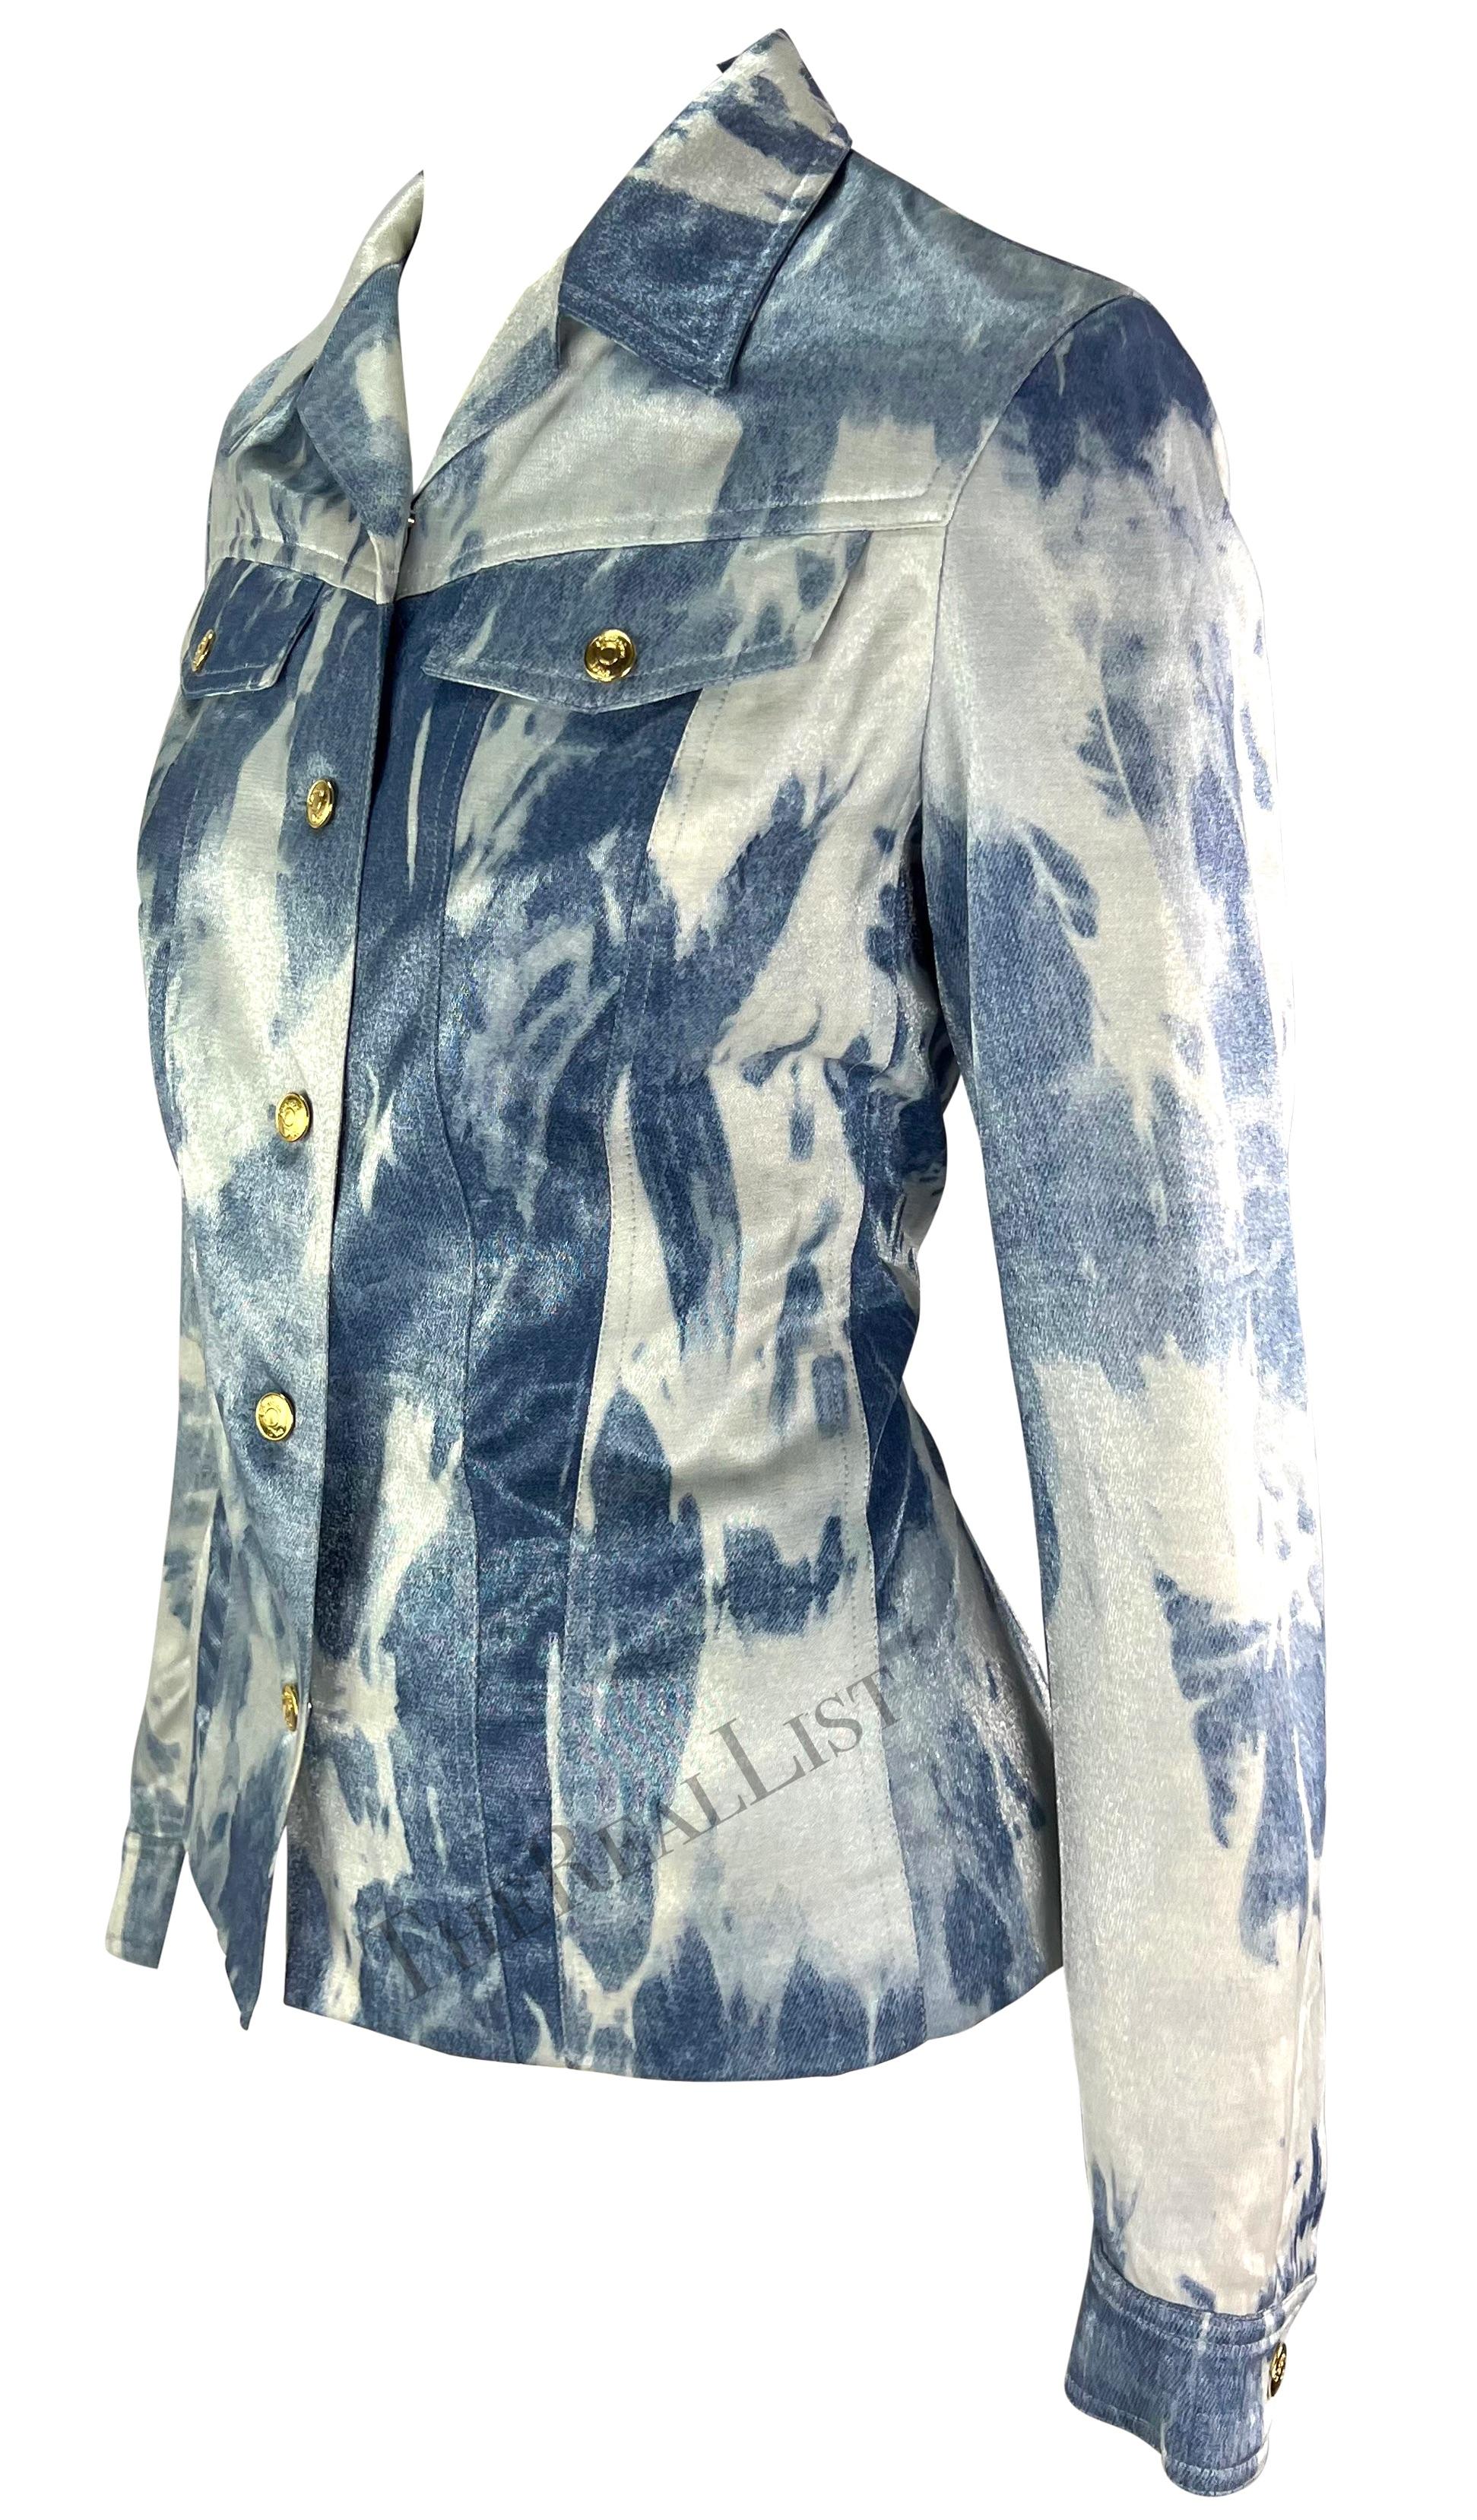 Featuring a blue tie-dye trucker-style jacket by Christian Dior, designed by John Galliano from the popular Spring/Summer 2000 collection. This jacket showcases the collection's well-known blue bleached denim-style tie-dye pattern, offering a subtle